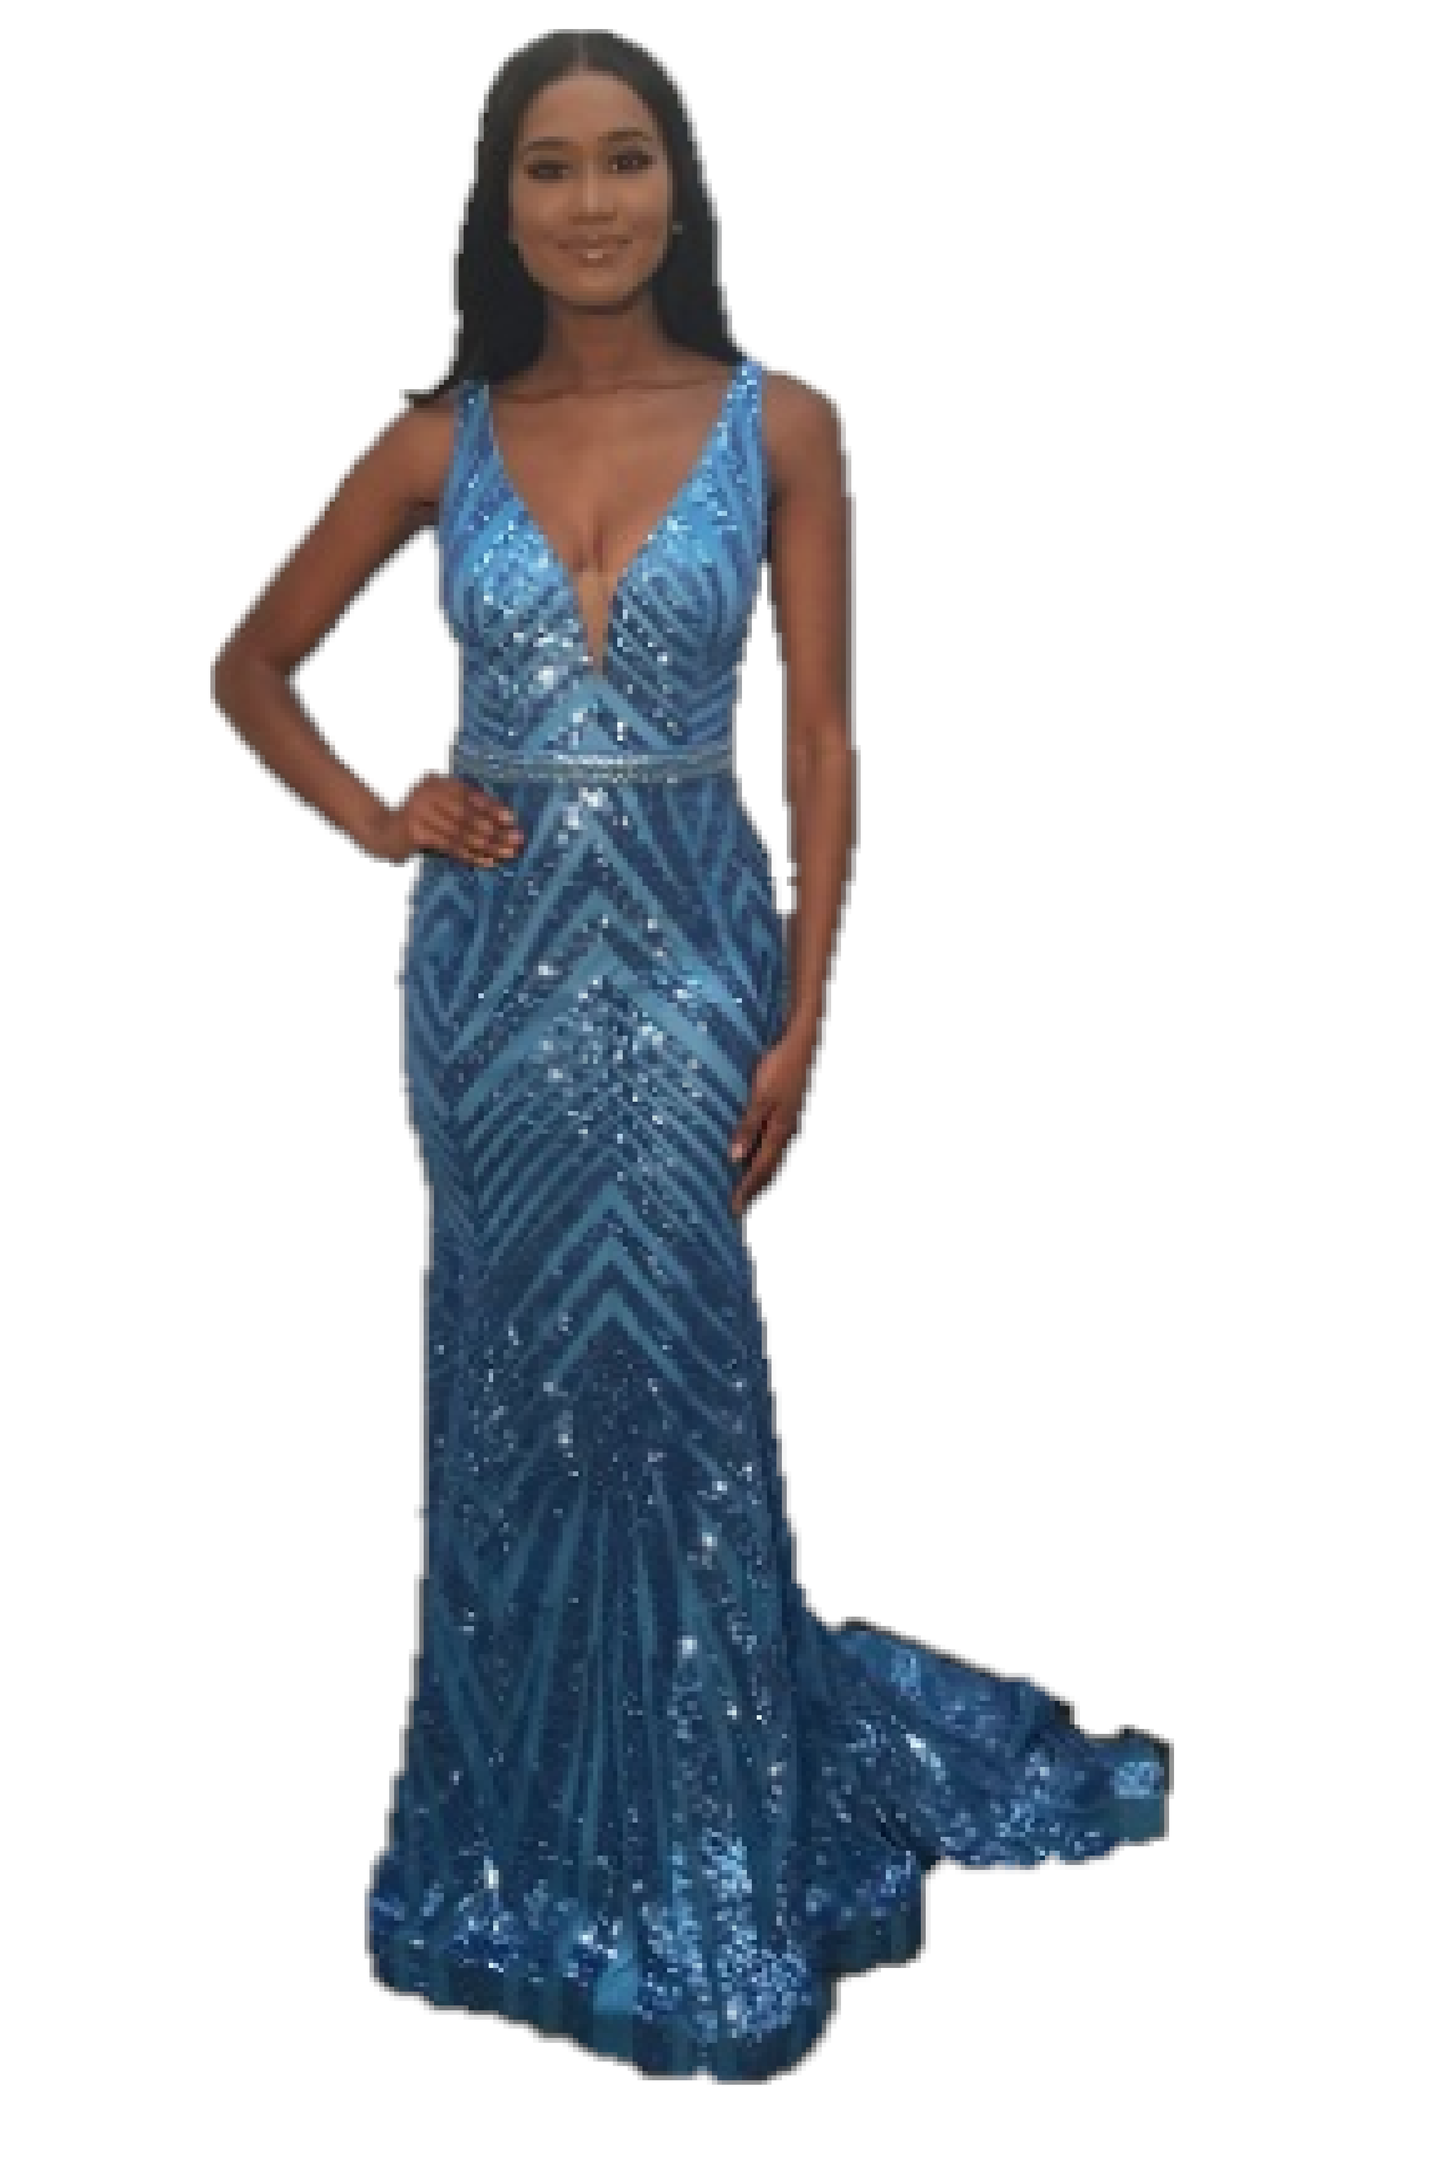 Jovani 03570 is a Long fitted formal evening gown. Featuring a fully Embellished geometric sequin pattern. Plunging deep V Neckline and open V back. This Backless Pageant Gown Features a mermaid silhouette with a lush trumpet skirt & Sweeping train. Sheer side panels with mesh insert. Crystal Rhinestone embellished waist belt. Available Sizes: 00,0,2,4,6,8,10,12,14,16,18,20,22,24  Available Colors: black/nude, light-blue, red, rose/gold, yellow